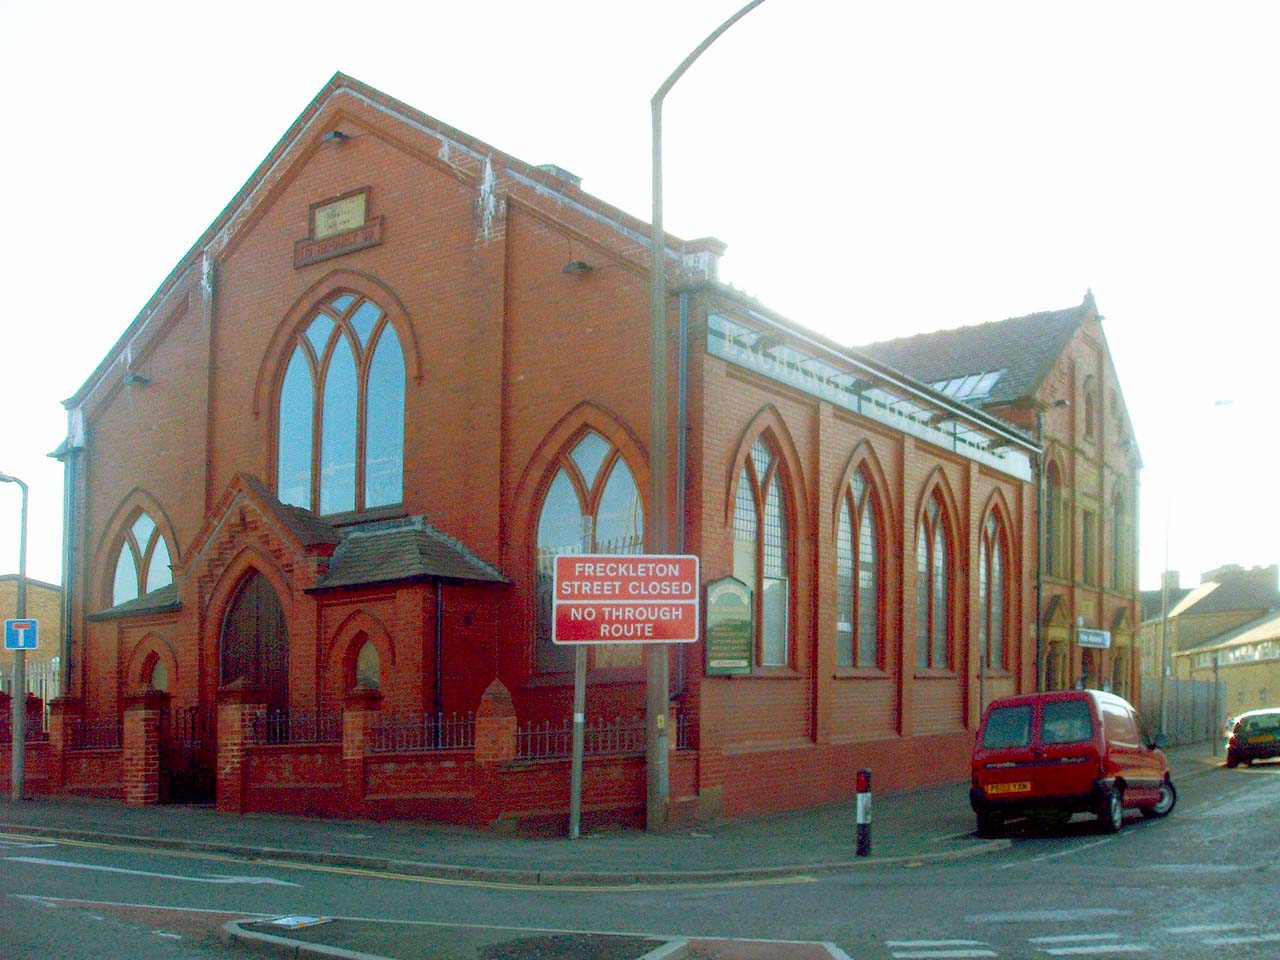 And the newer building, no longer used as a church